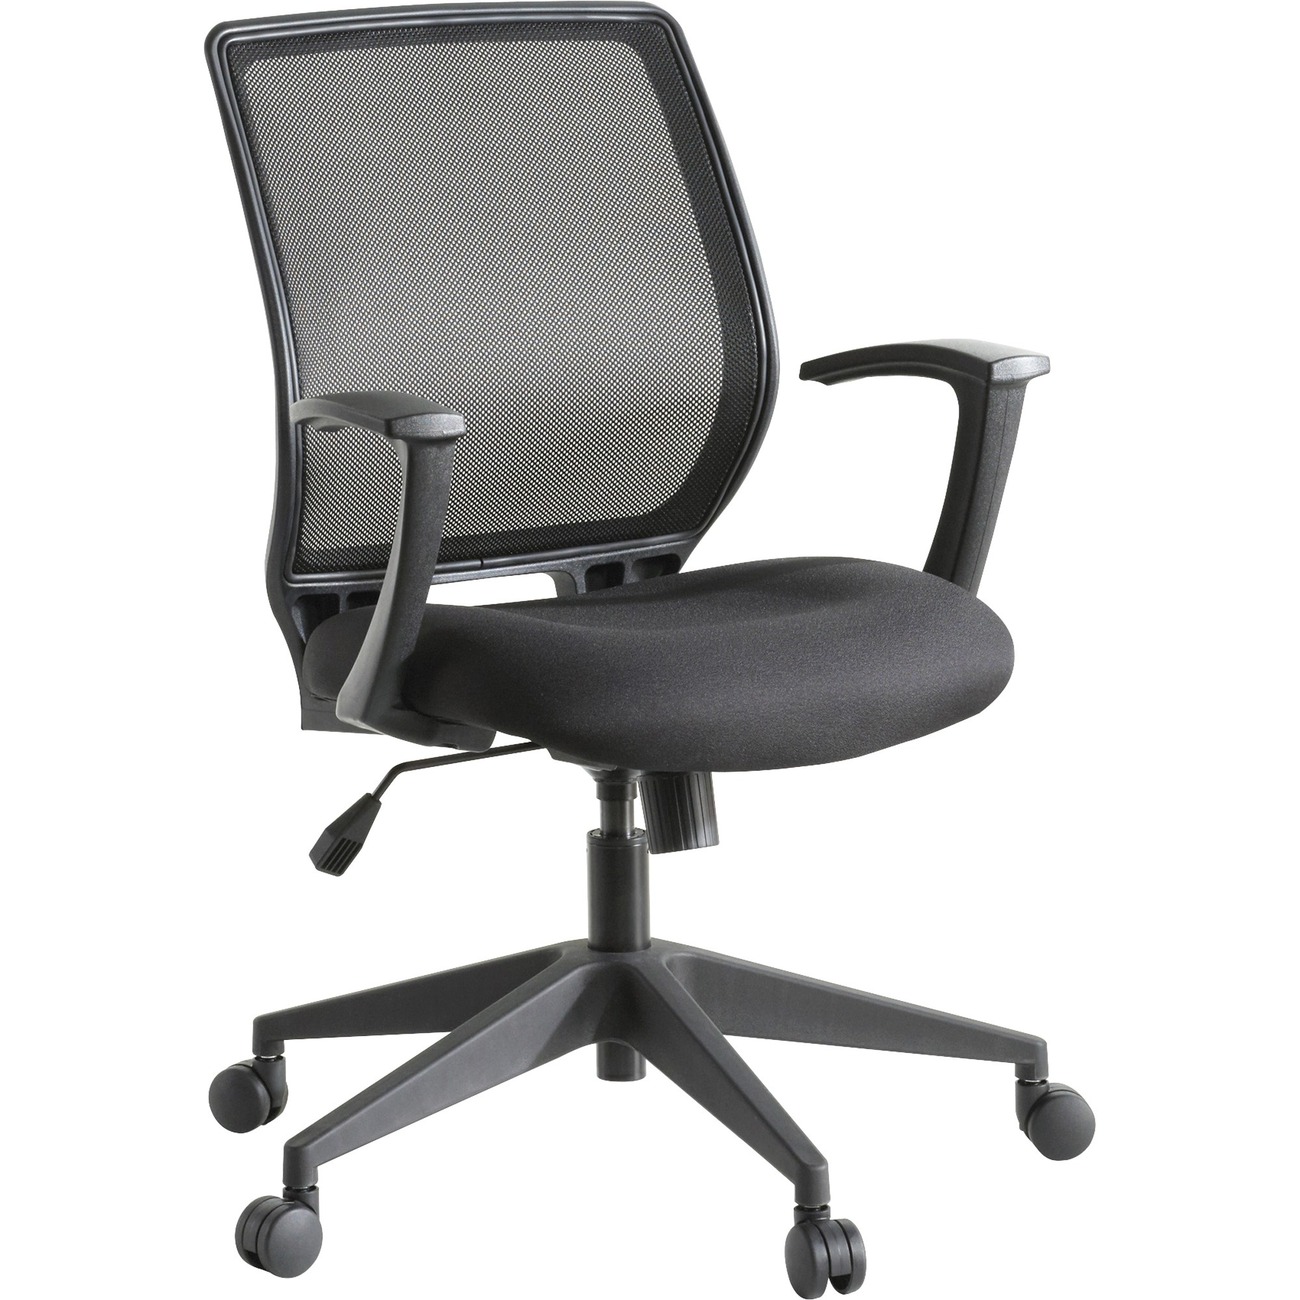 Lorell Executive Mid-back Work Chair (LLR84868)-image